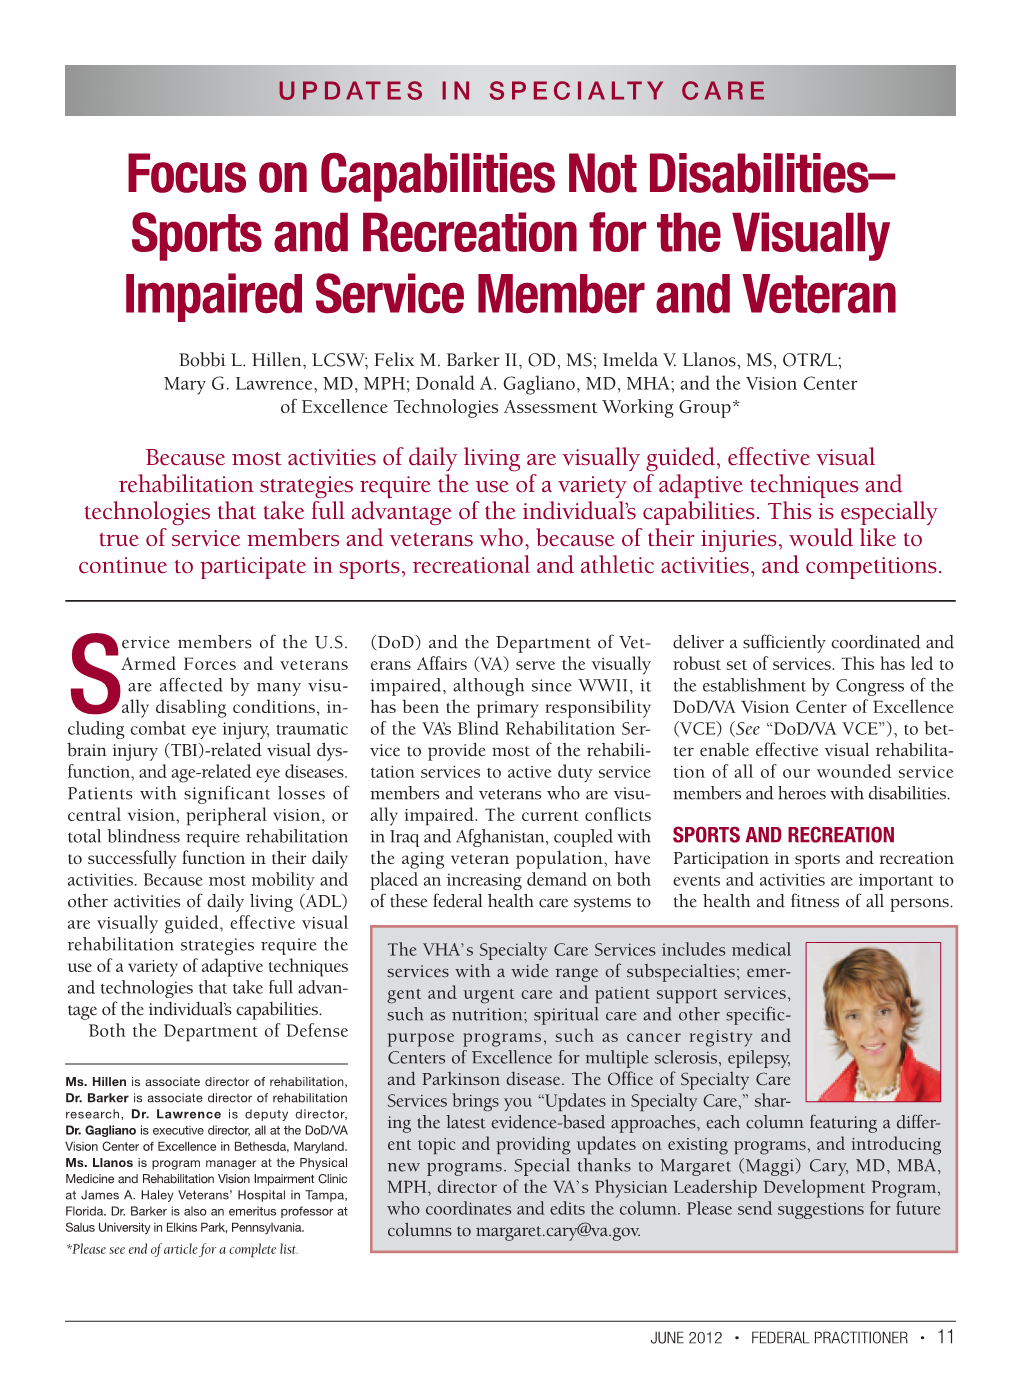 Sports and Recreation for the Visually Impaired Service Member and Veteran